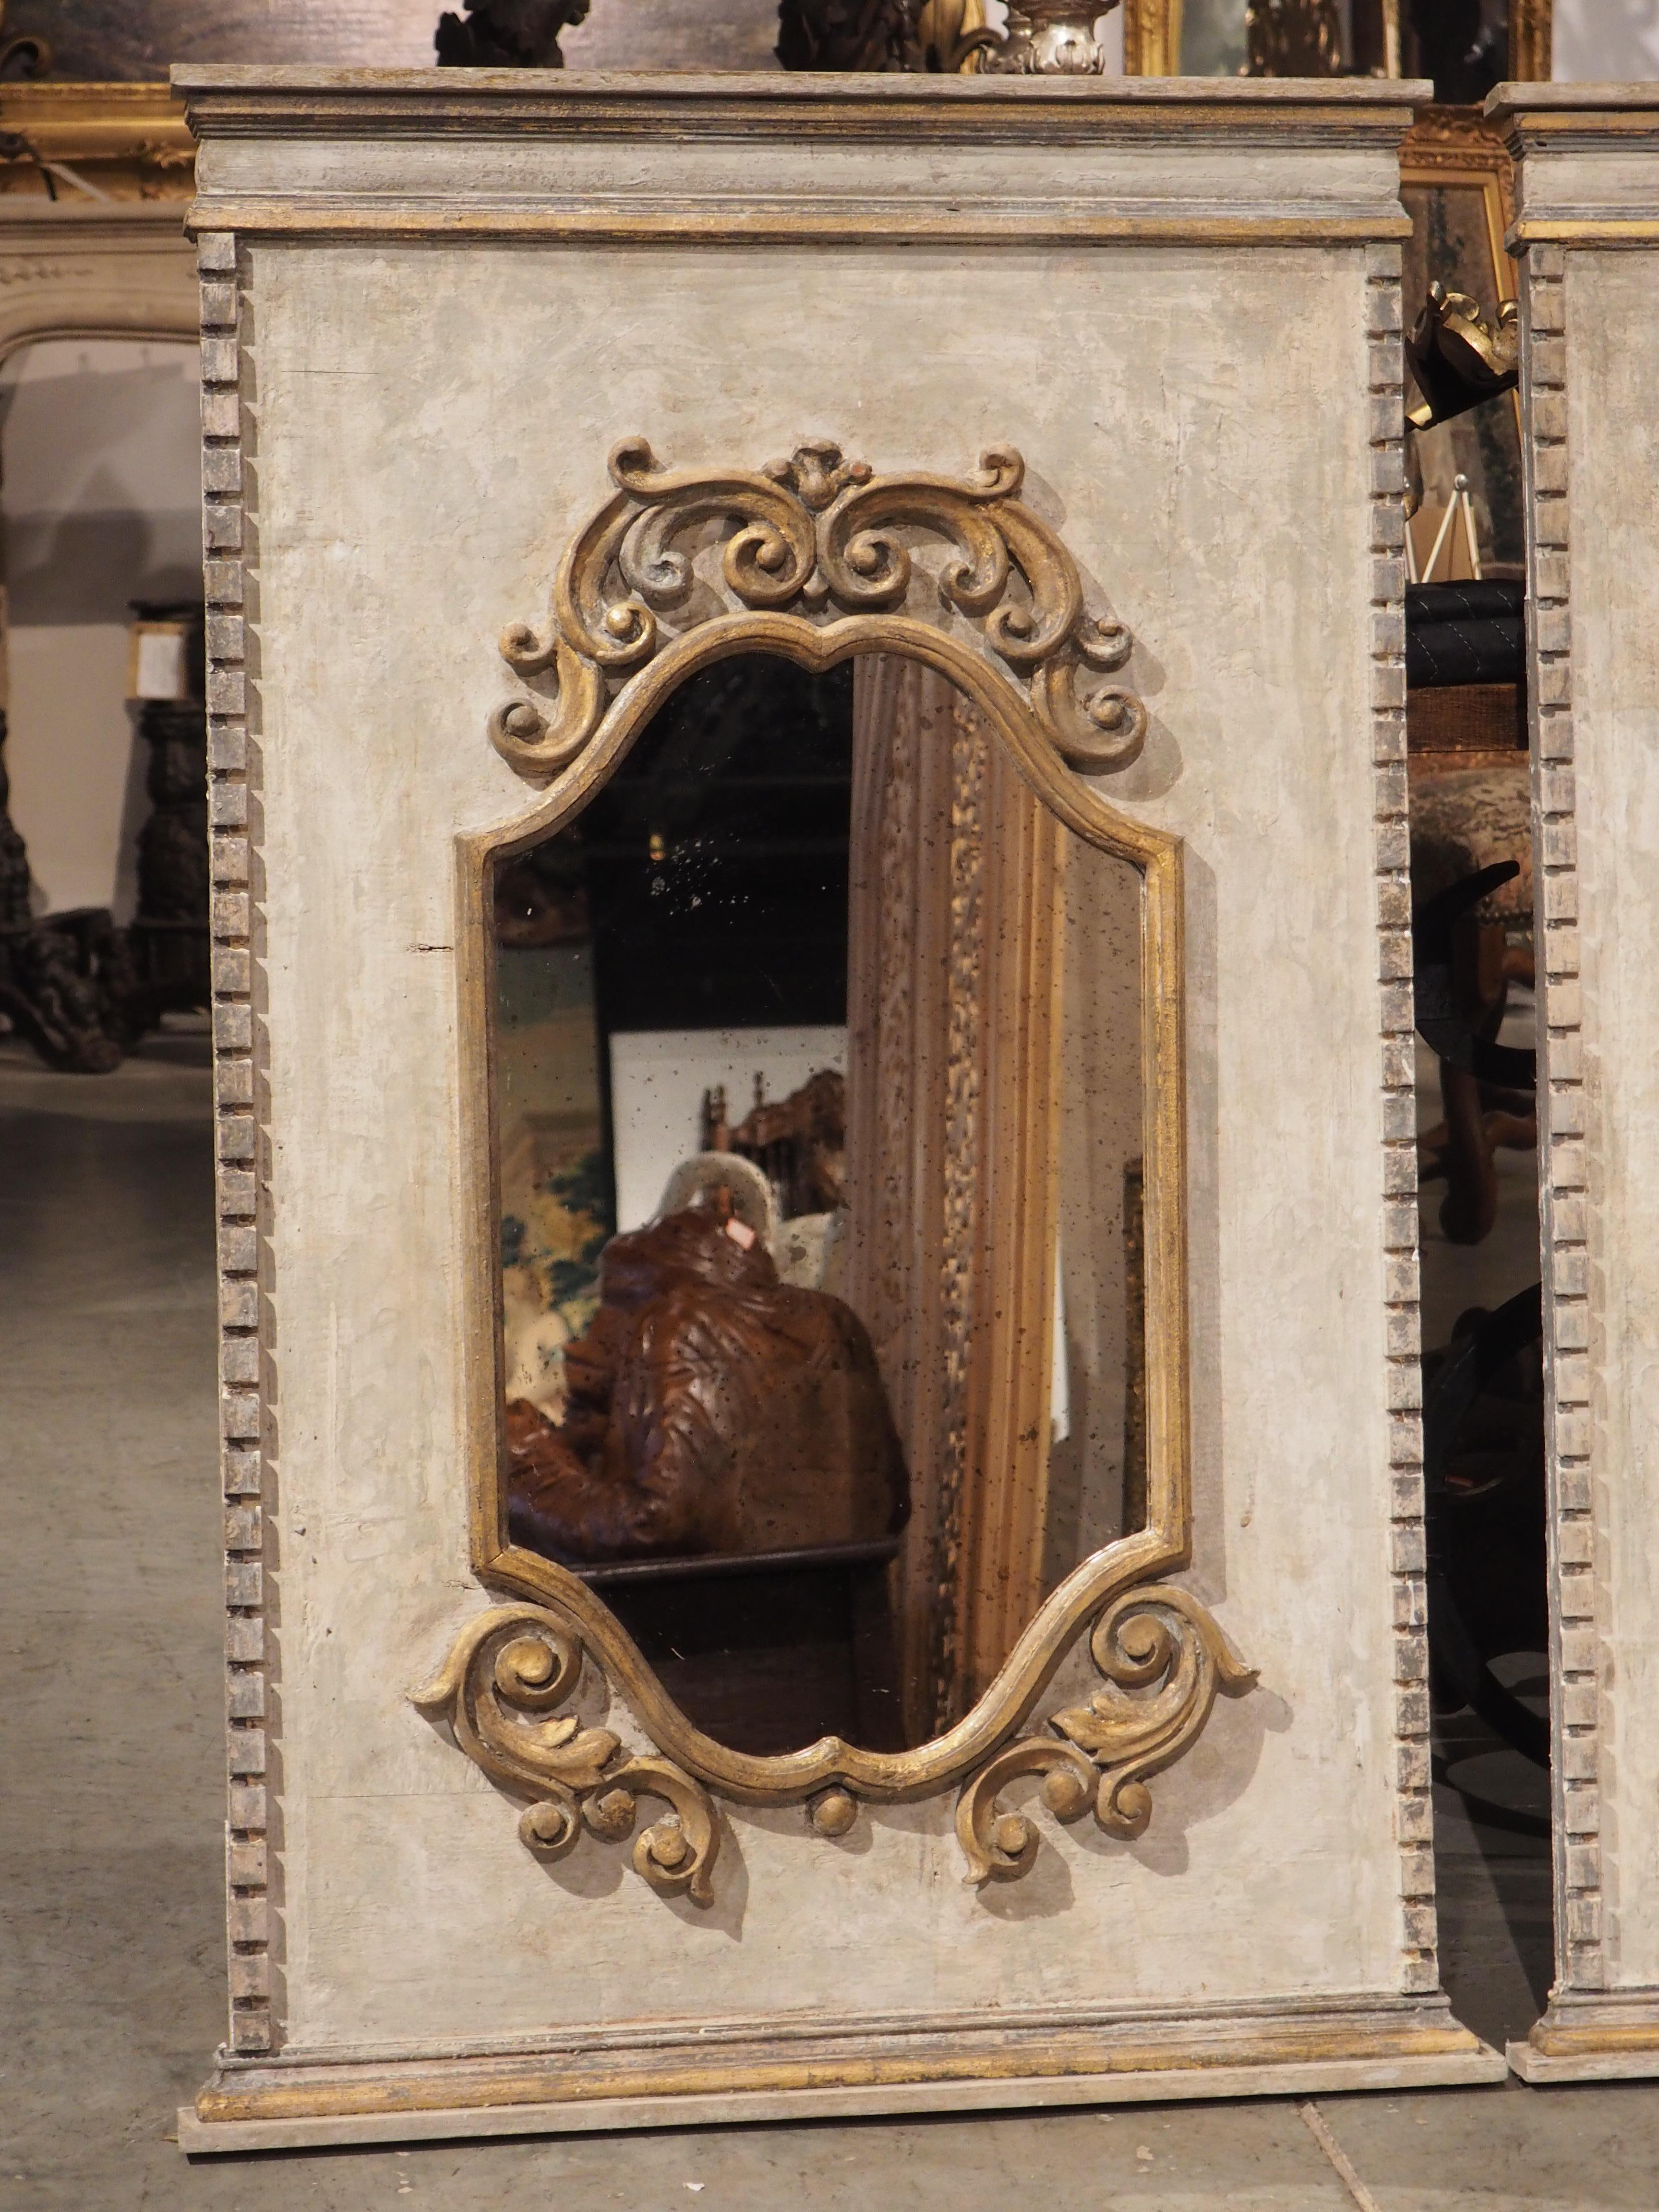 Hand-carved in Florence, Italy, this pair of wall mirrors have been surrounded by giltwood carvings on top of painted boiserie panels. The panels, which feature a column of crenellation along each edge, have been painted in a polychrome